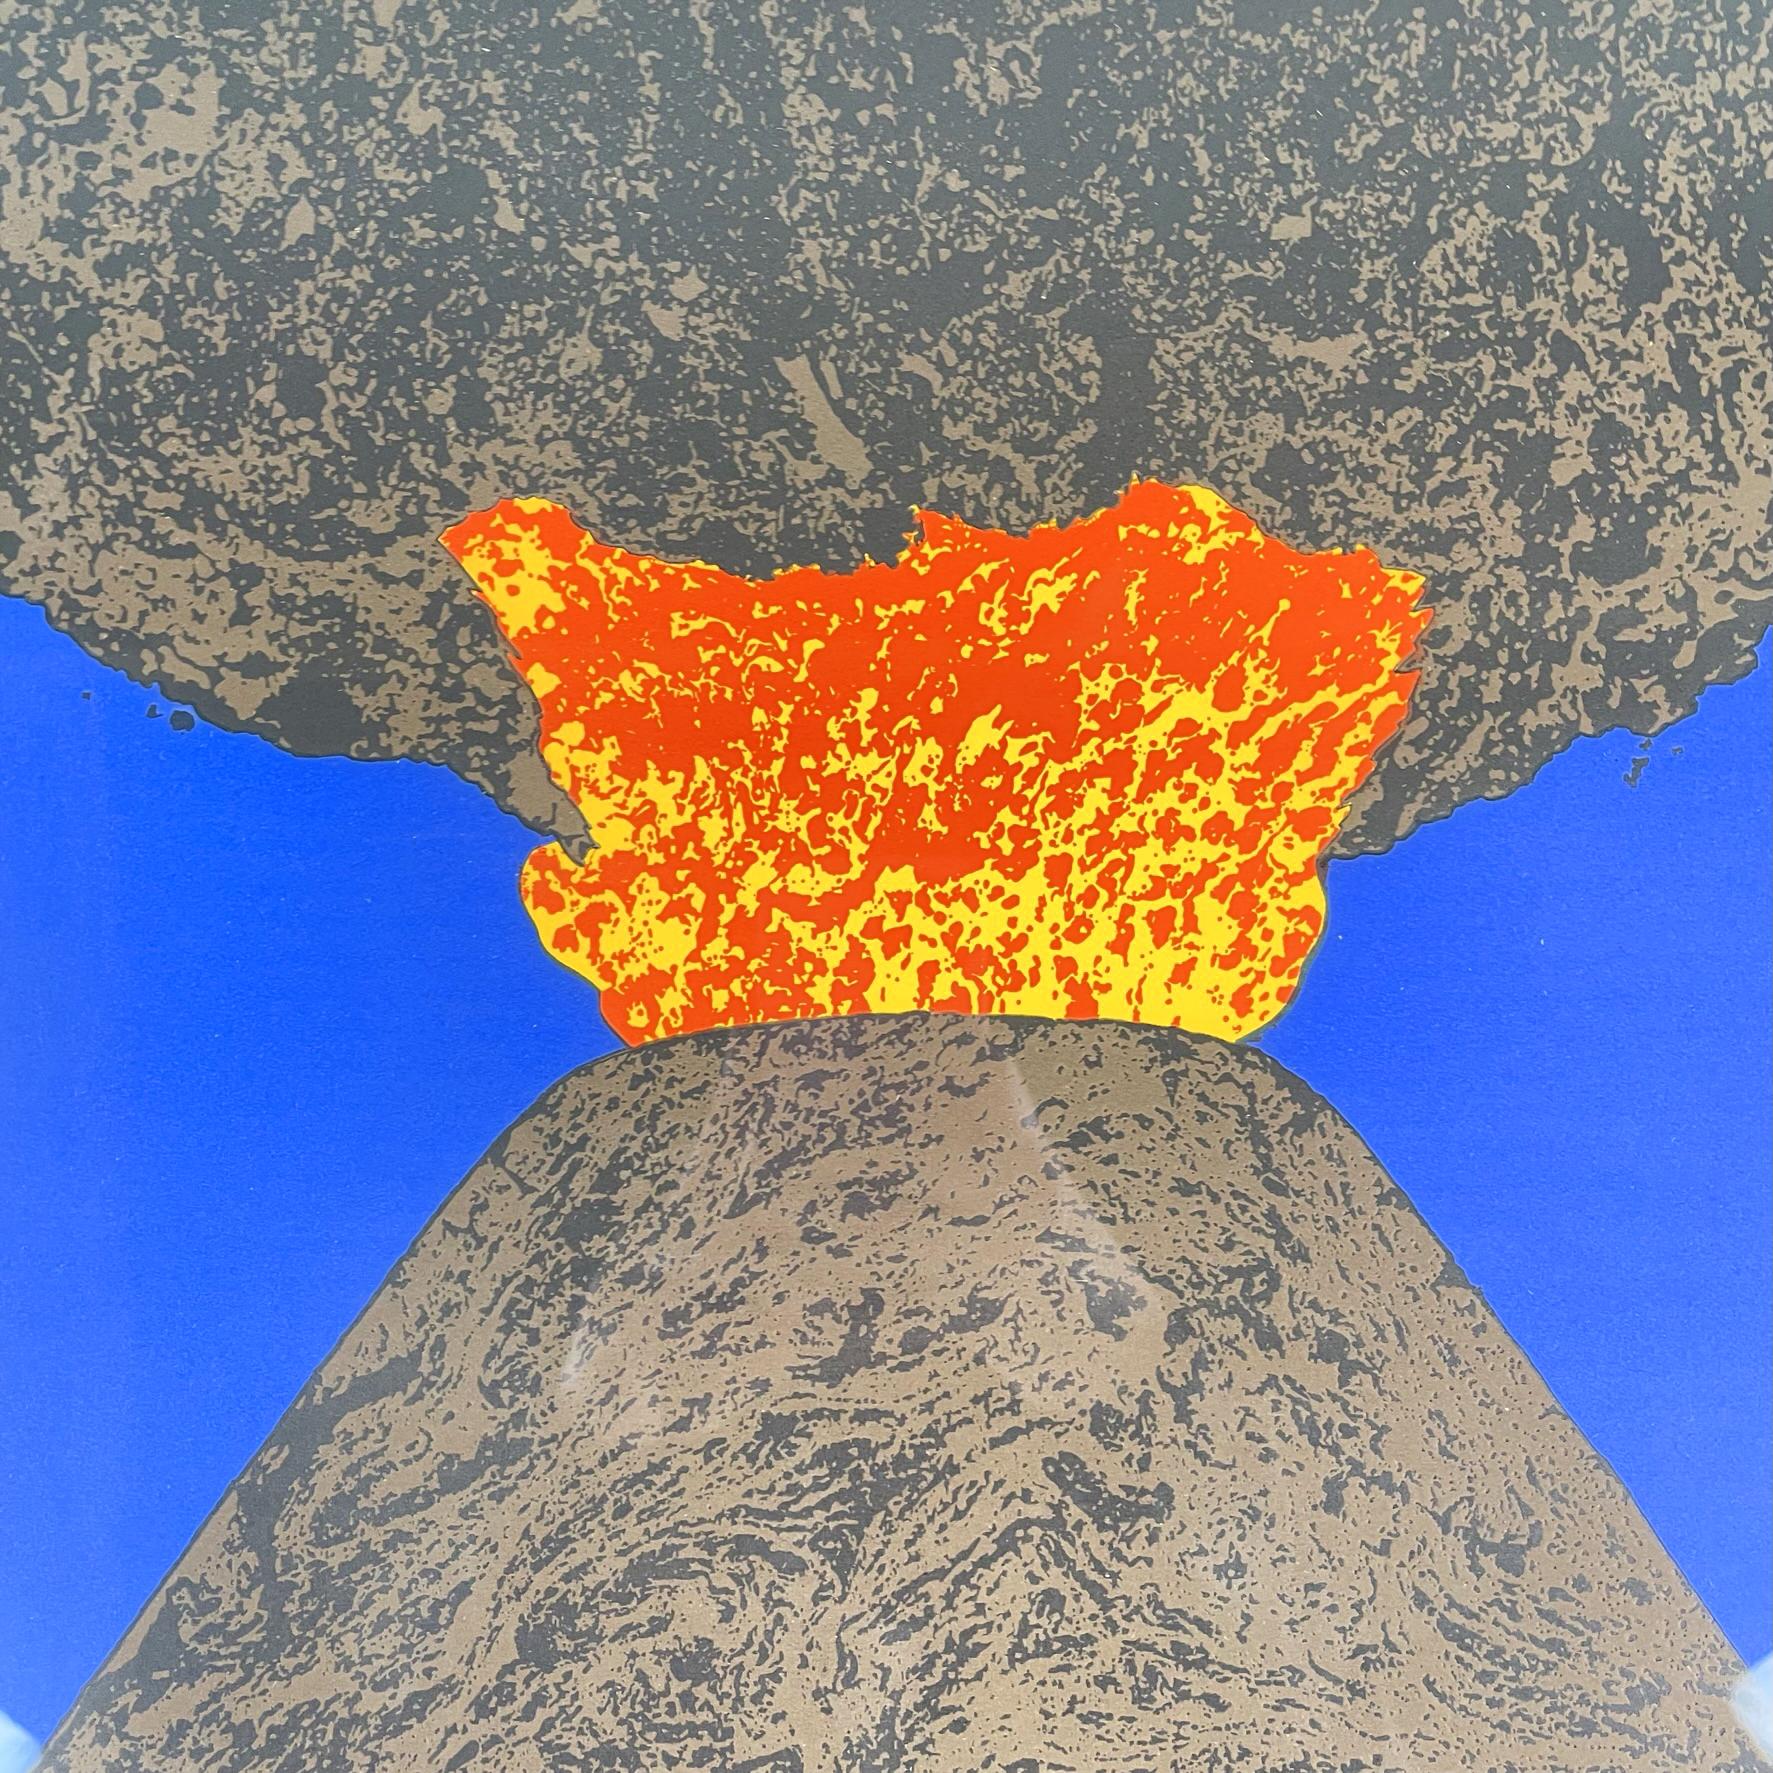 Italian modern Press-print erupting volcano by Enzo Mari, 1984
Print named il Vulcano (the volcano) from the Natura series on white paper. The painting represent the silhouette of a brown volcano that is spewing smoke and red and yellow lava, on a